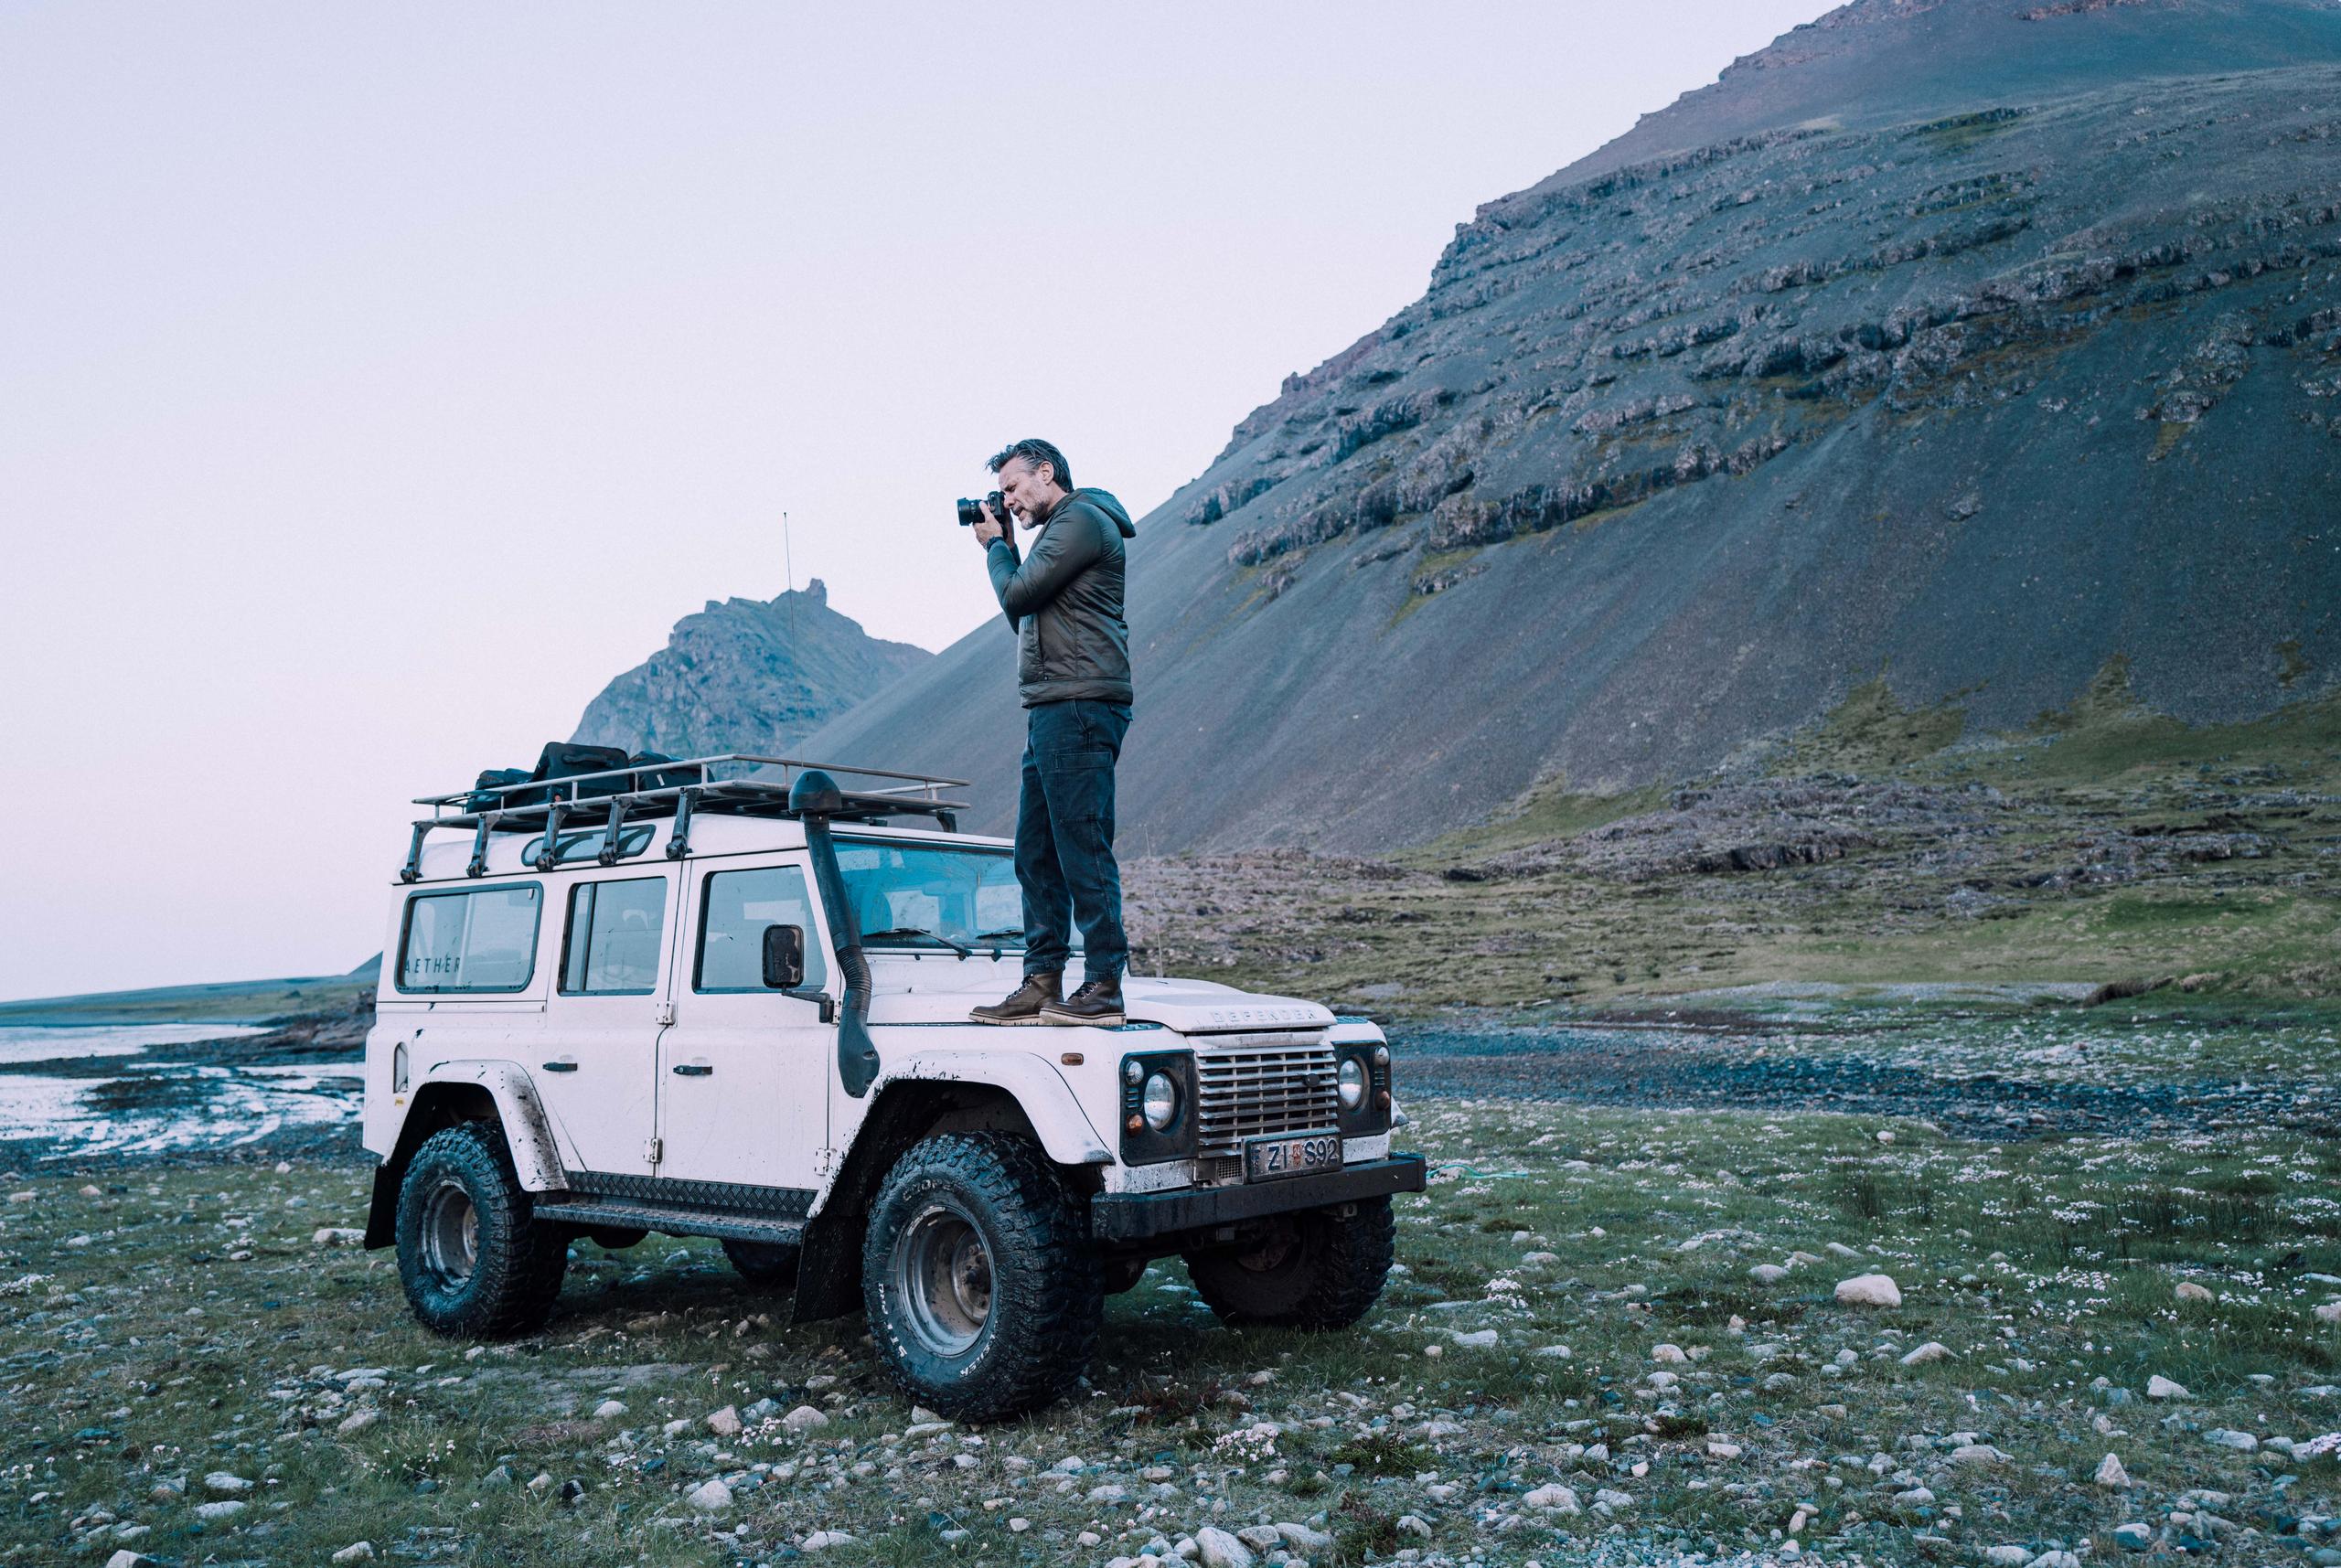 Man with camera standing on top of white Defender truck in Iceland landscape